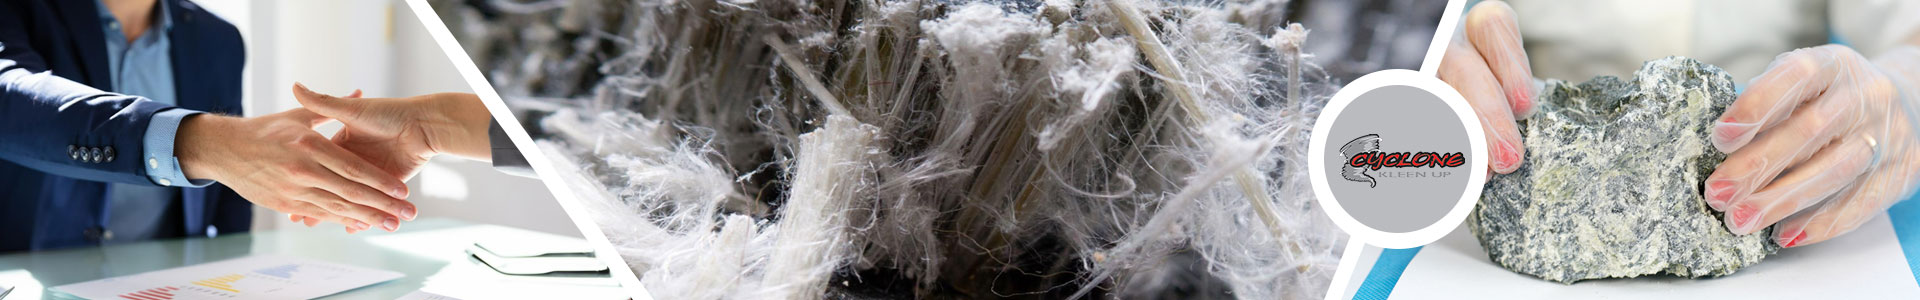 Tips to Hire an Asbestos Testing Company in Colorado Springs, CO